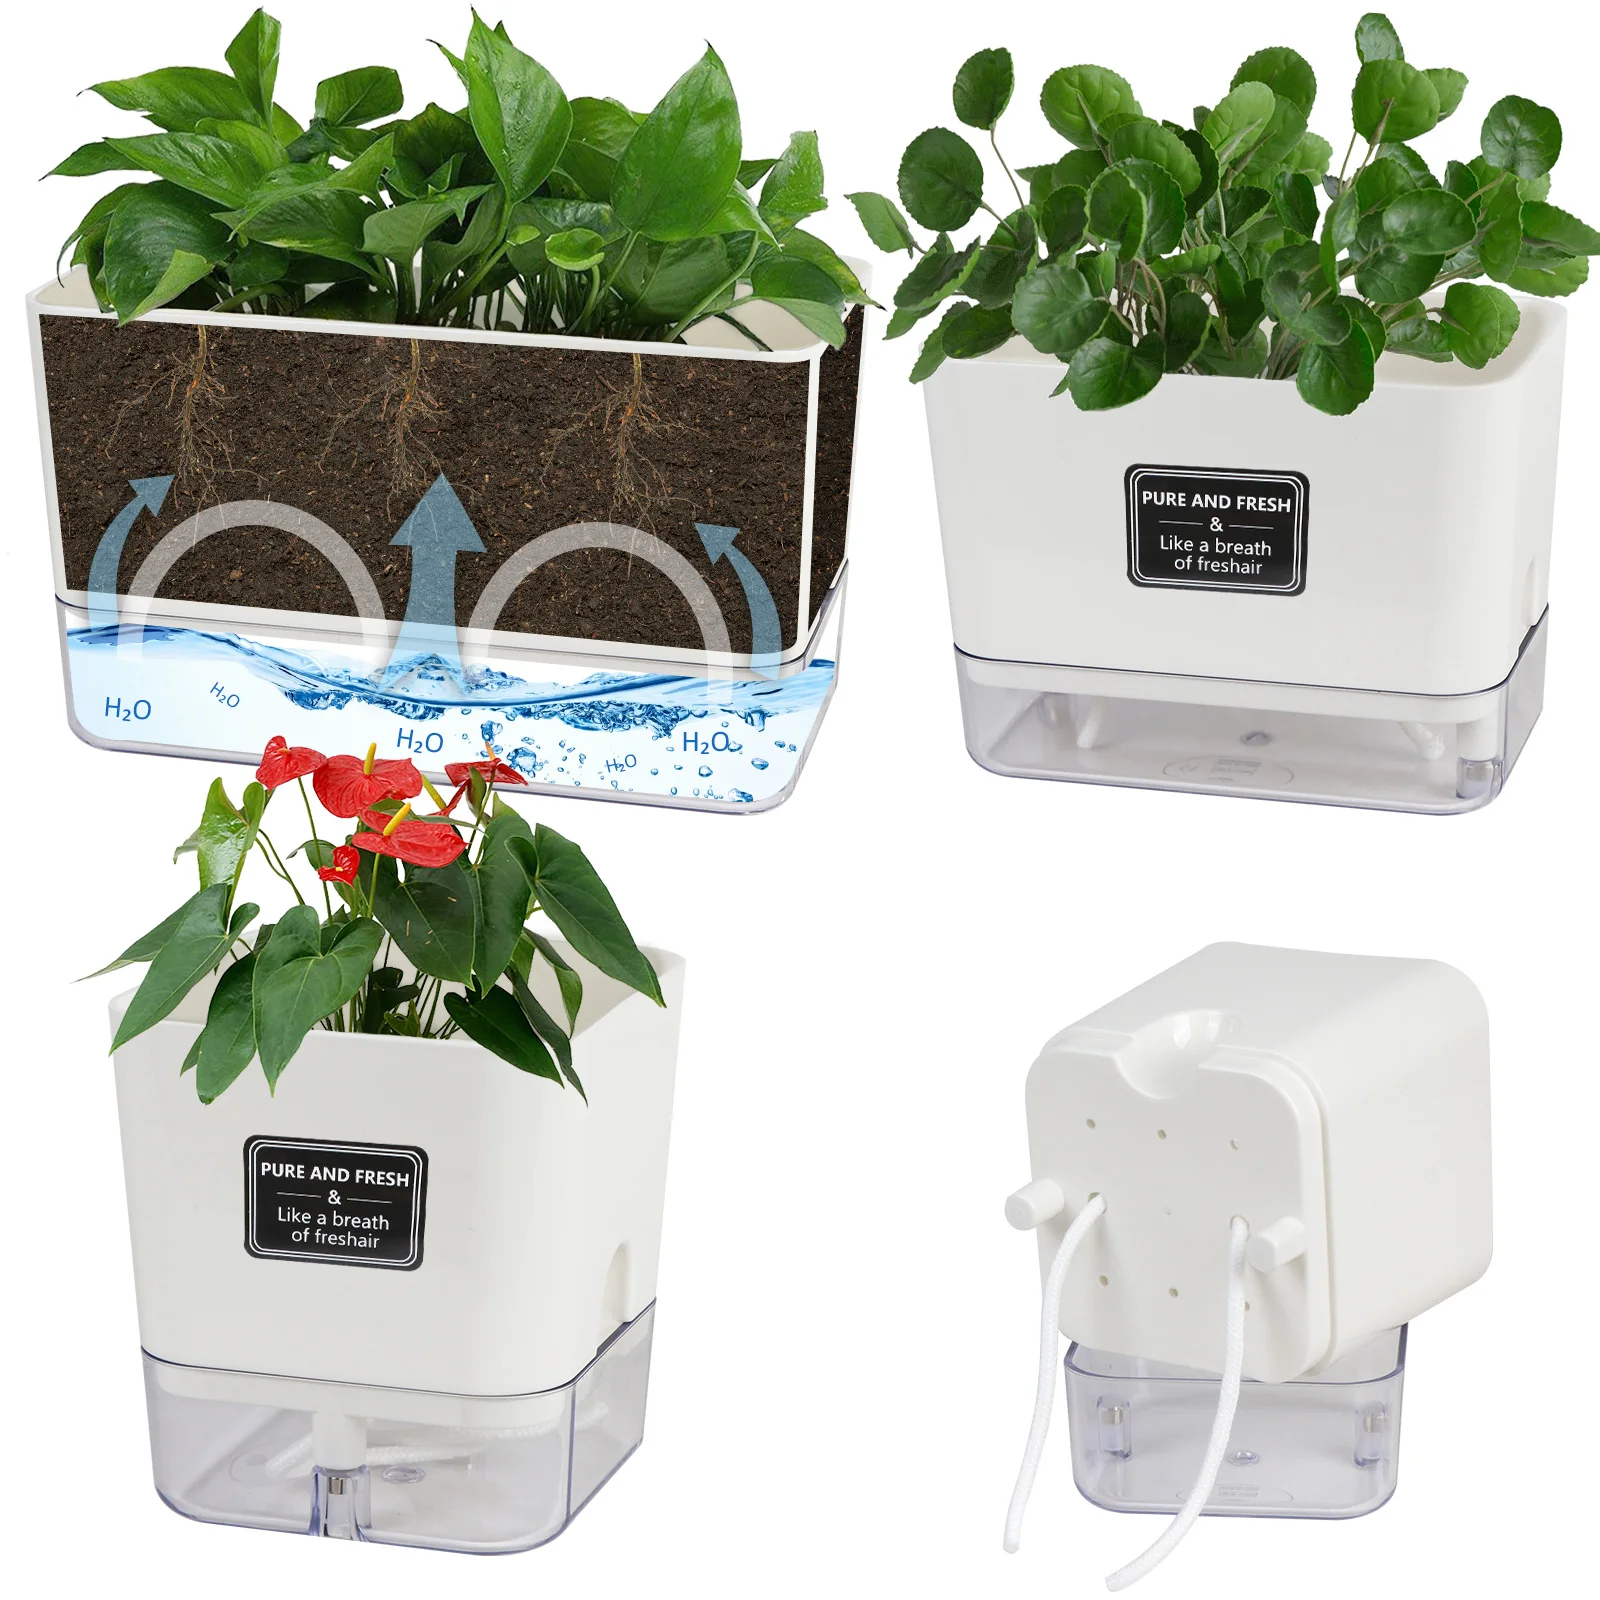 4 Pack Self Watering Planters for Indoor Plants White Square Plant Pots Automatic Moisturizing Self Watering Flower Pots Decor